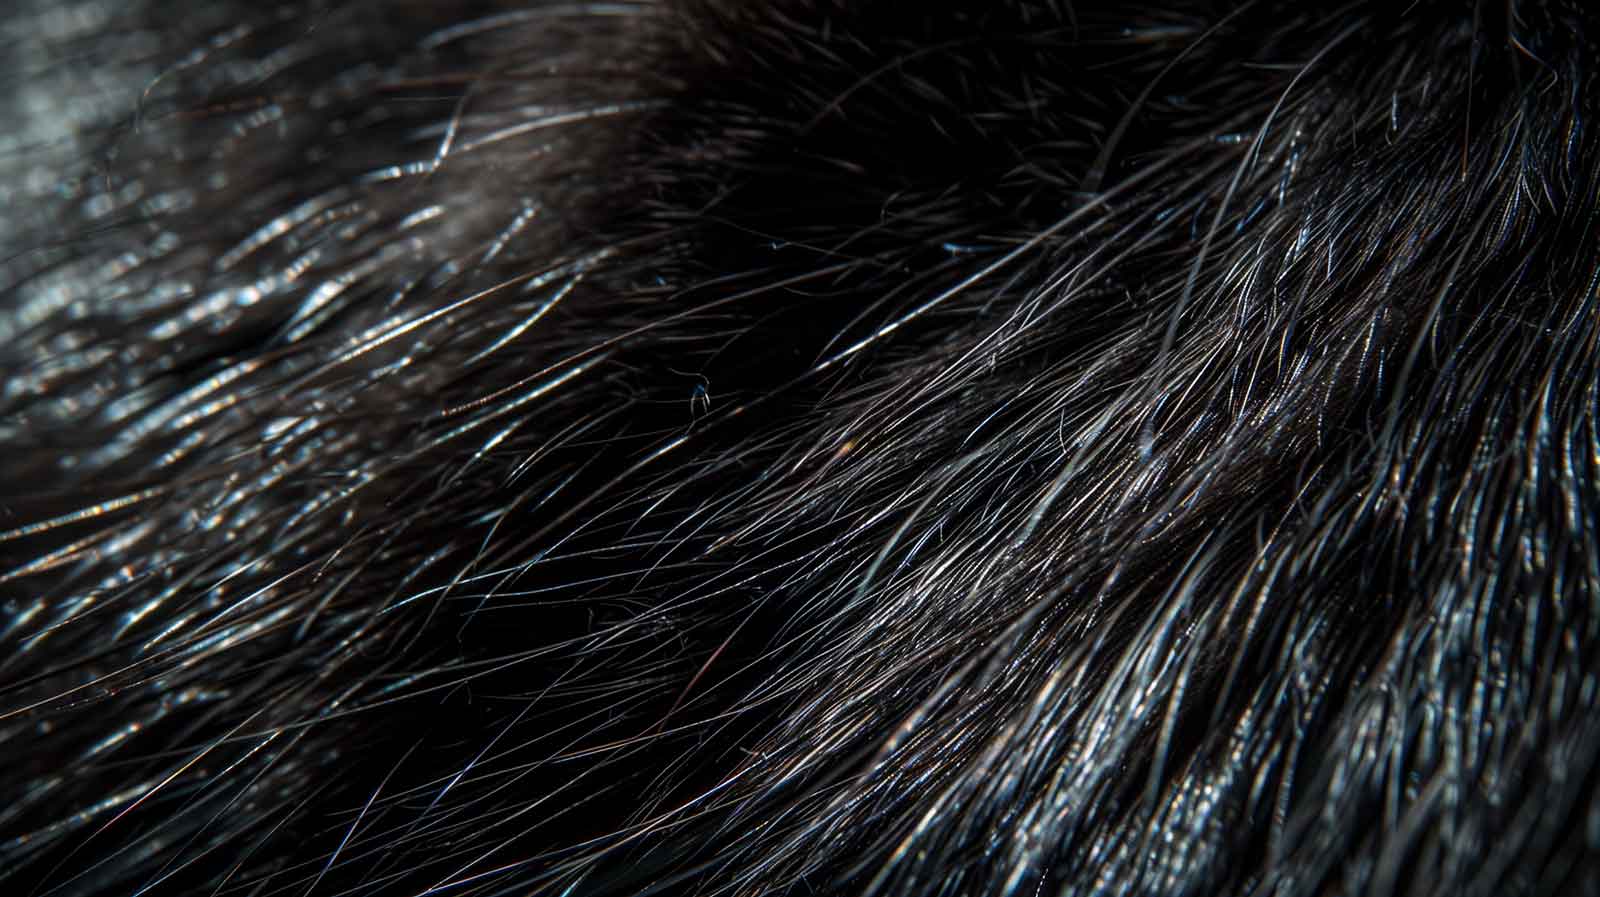 A close-up macro photo focusing on the texture of shiny black fur. The image captures the intricate details of each hair, with light reflecting off the sleek, smooth surface creating highlights that contrast against the deeper shadows between the strands.